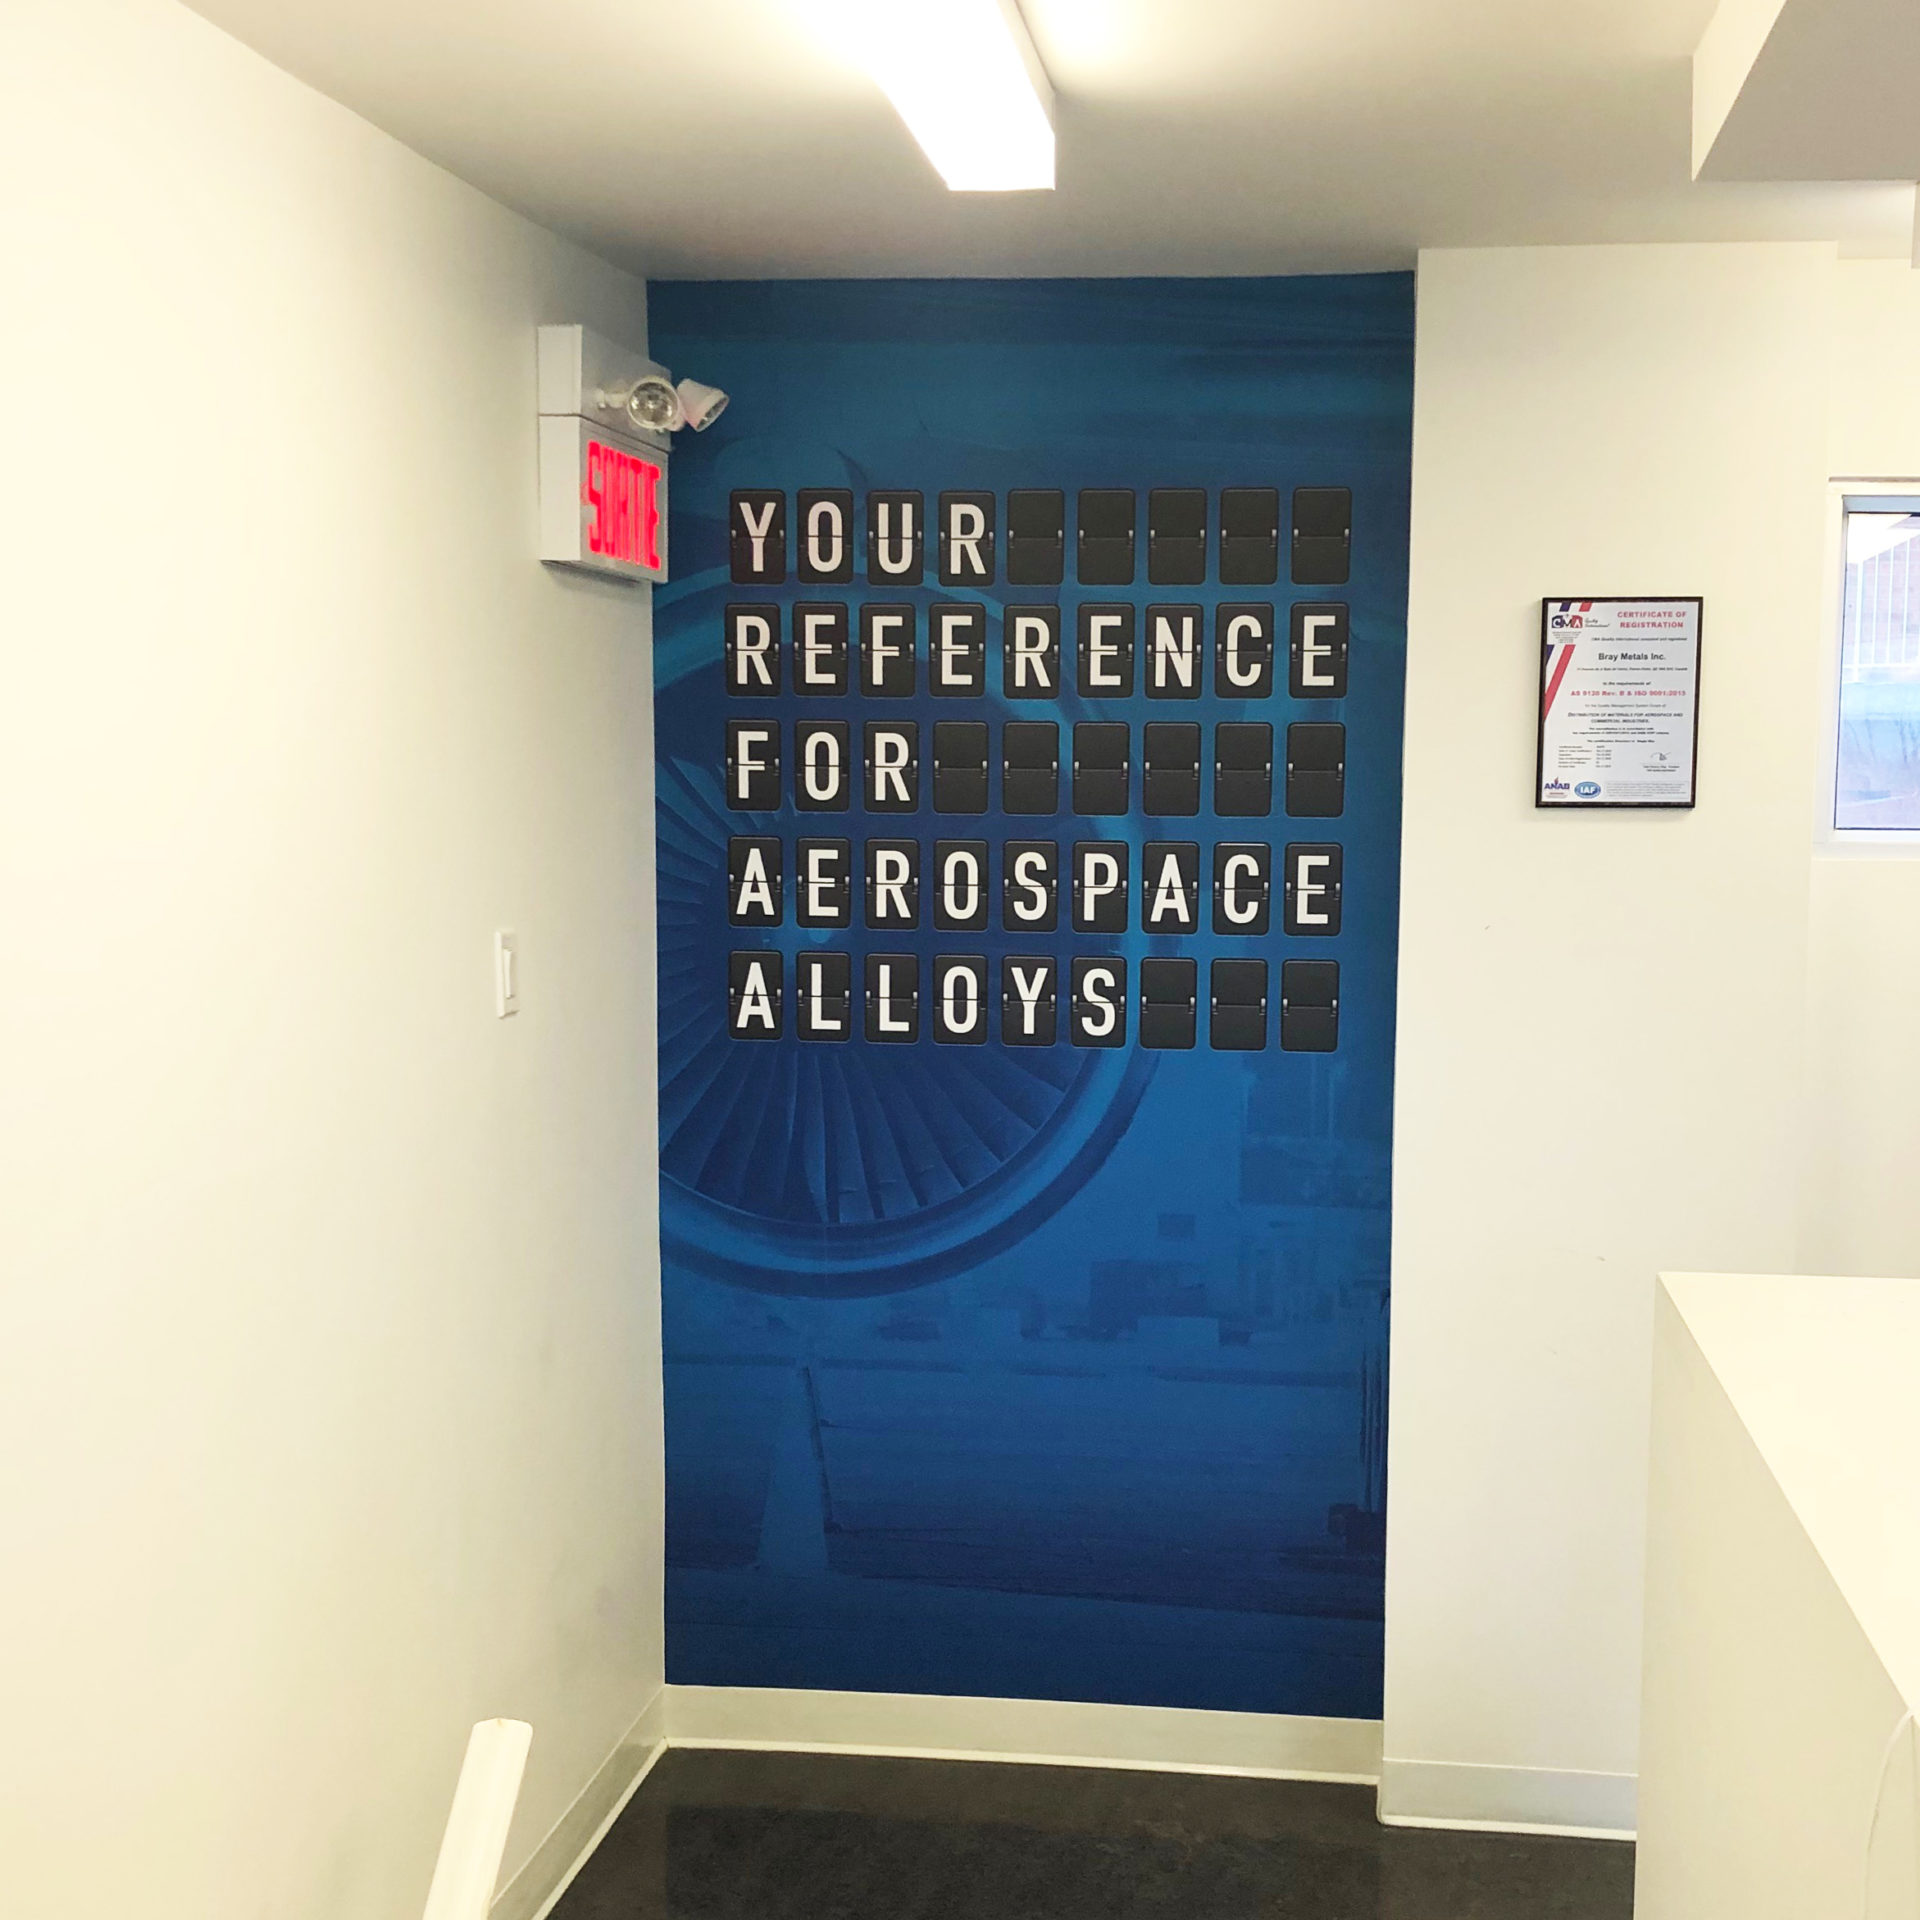 Wall Decals at Bray Metals offices in Pointe-Claire, Montreal. Written 'Your reference for aerospace alloys'.